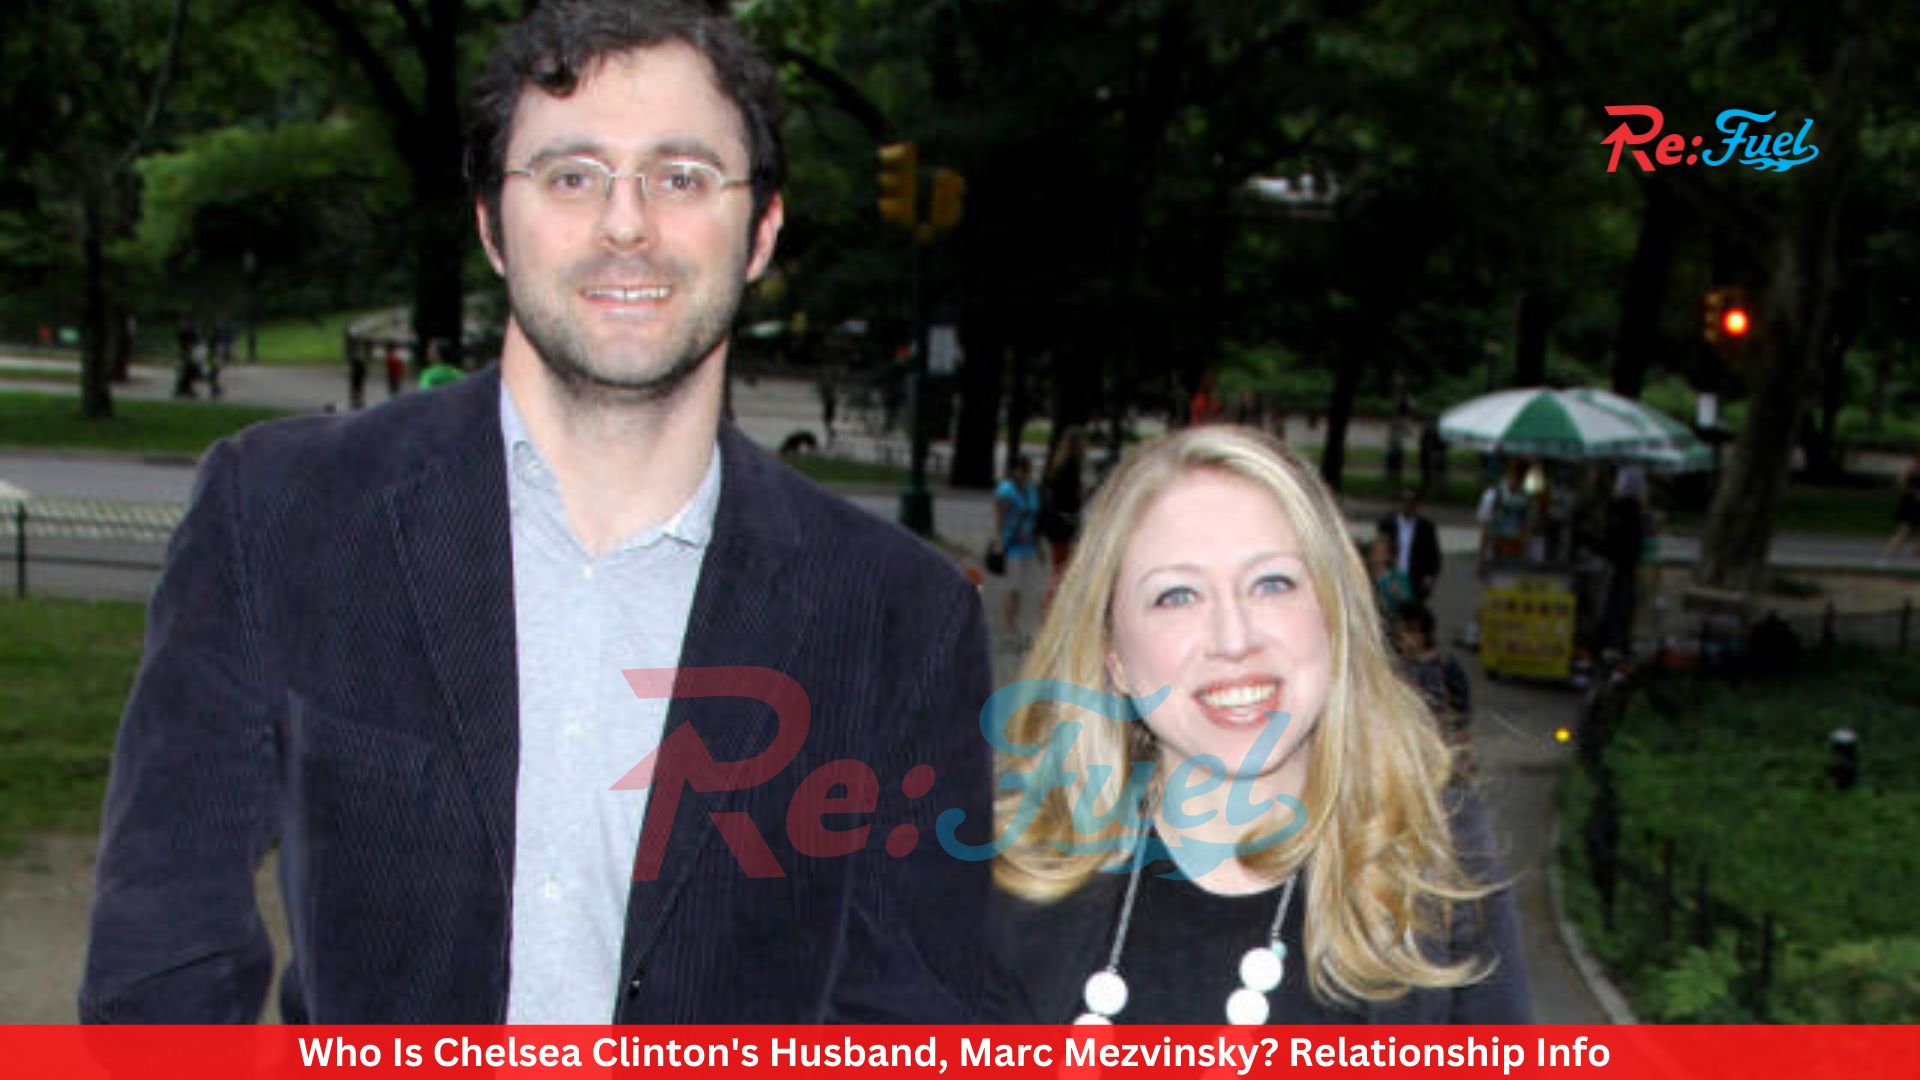 Who Is Chelsea Clinton's Husband, Marc Mezvinsky? Relationship Info